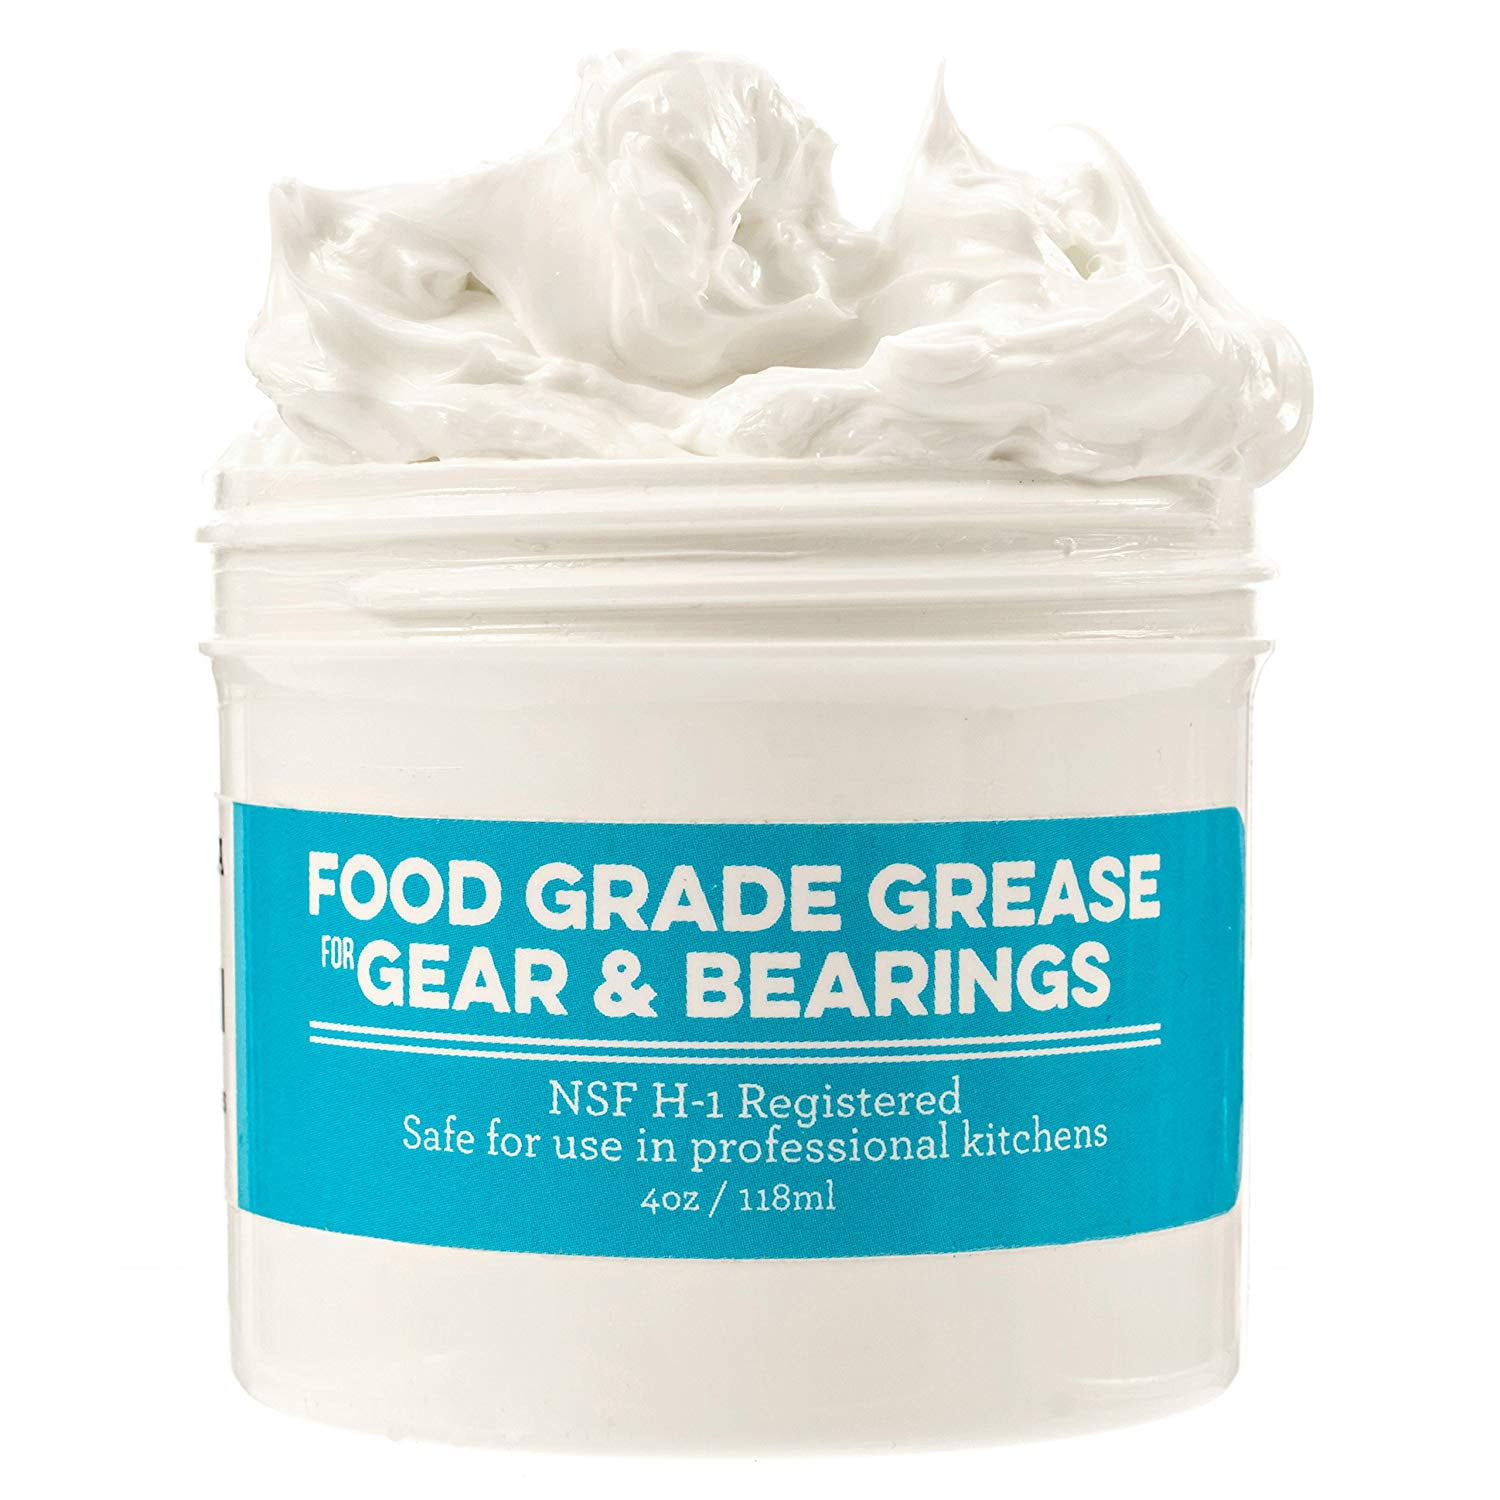 Food Grade Grease for Kitchen Aid Kitchenaid Mixers - Sold Per